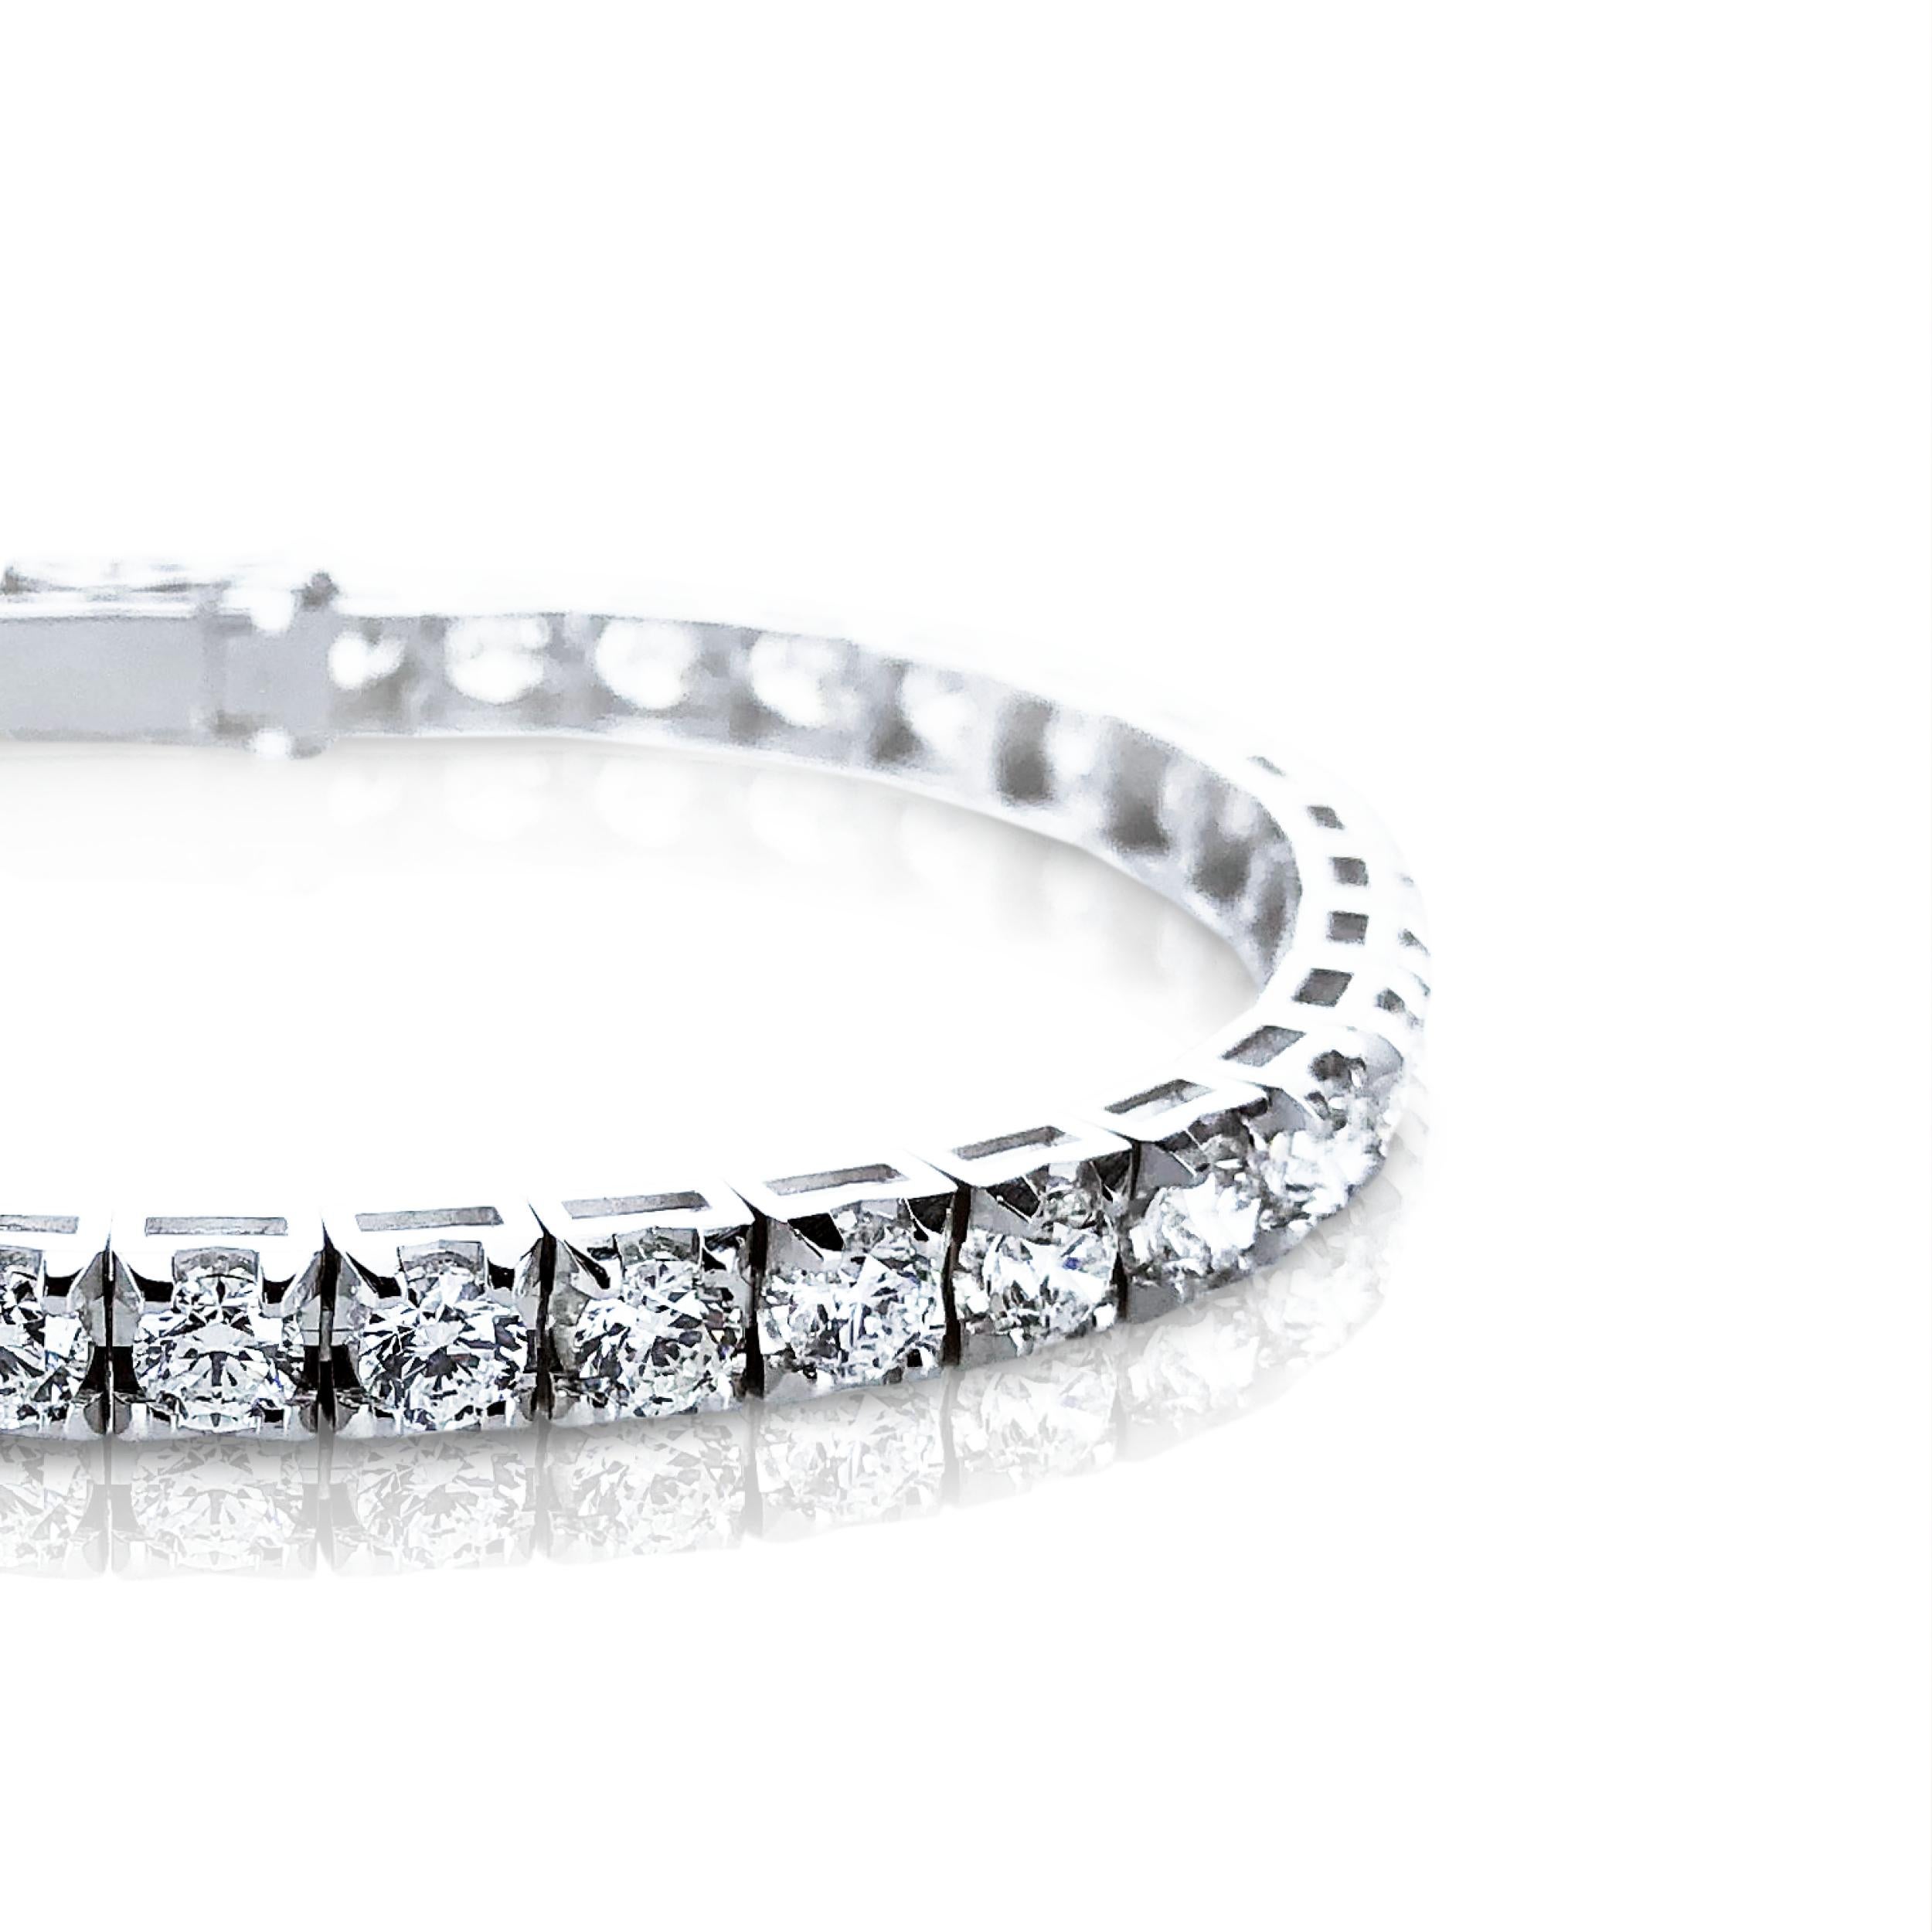 This 1.86 Carat HRD Certified Diamond Unisex Tennis Bracelet is set in 18kt white Gold. 

Timelessly stylish and wearable it is designed with the pyramid setting making the diamond appear larger than normal and effortlessly adding style and elegance